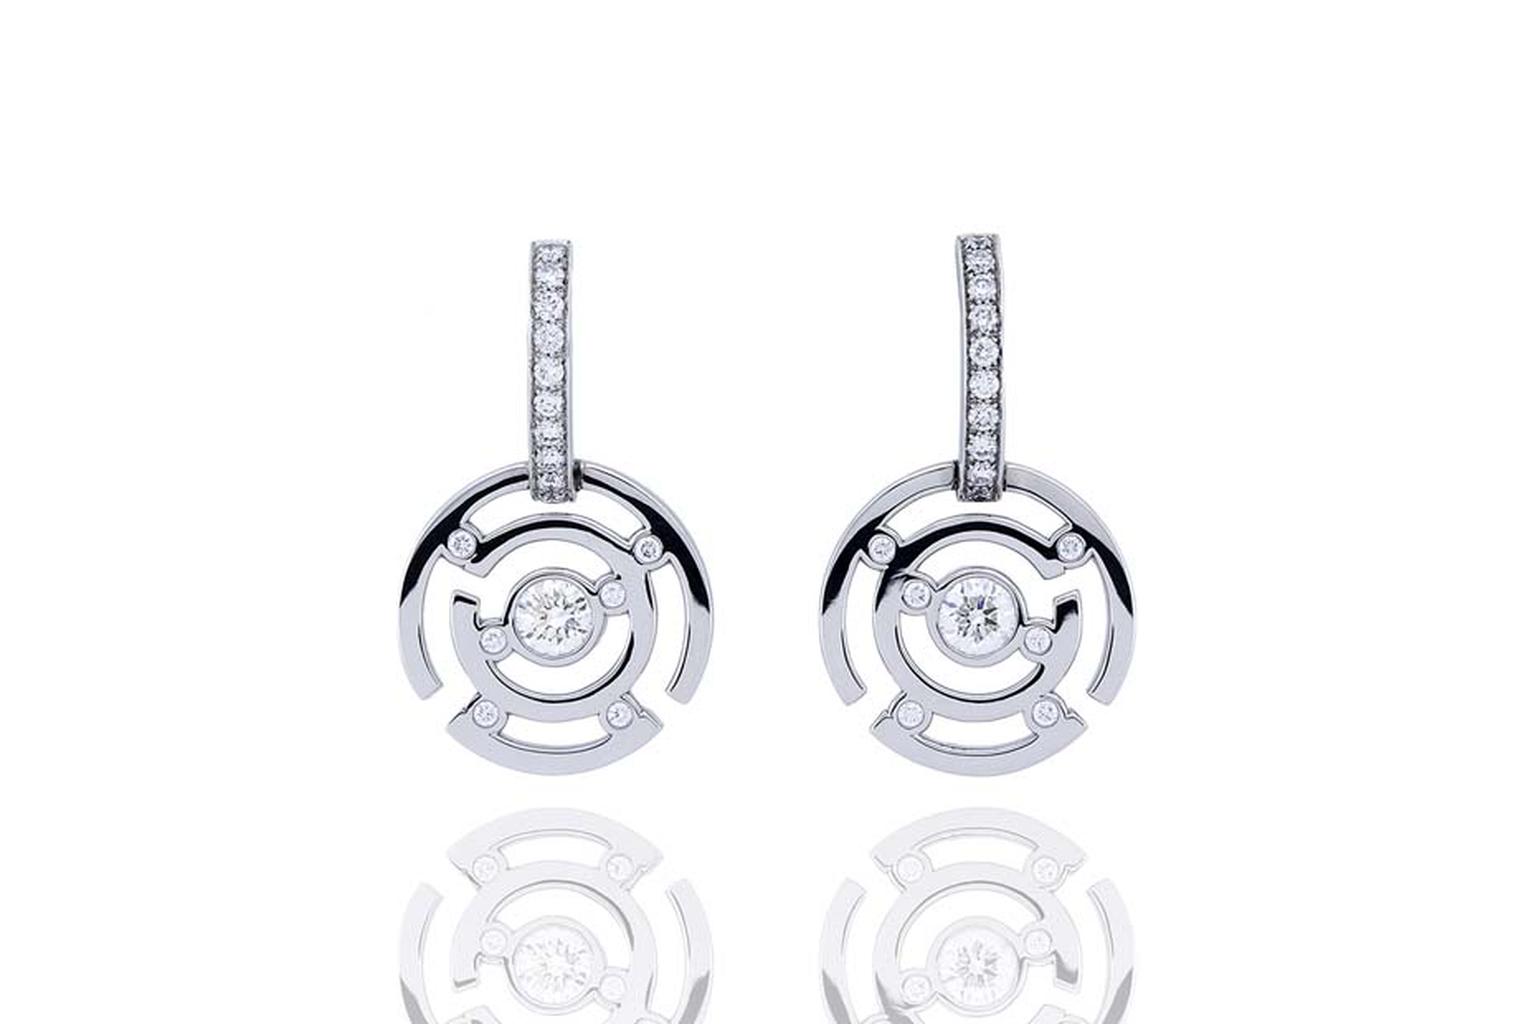 Boodles Maze collection diamond drop earrings in white gold.